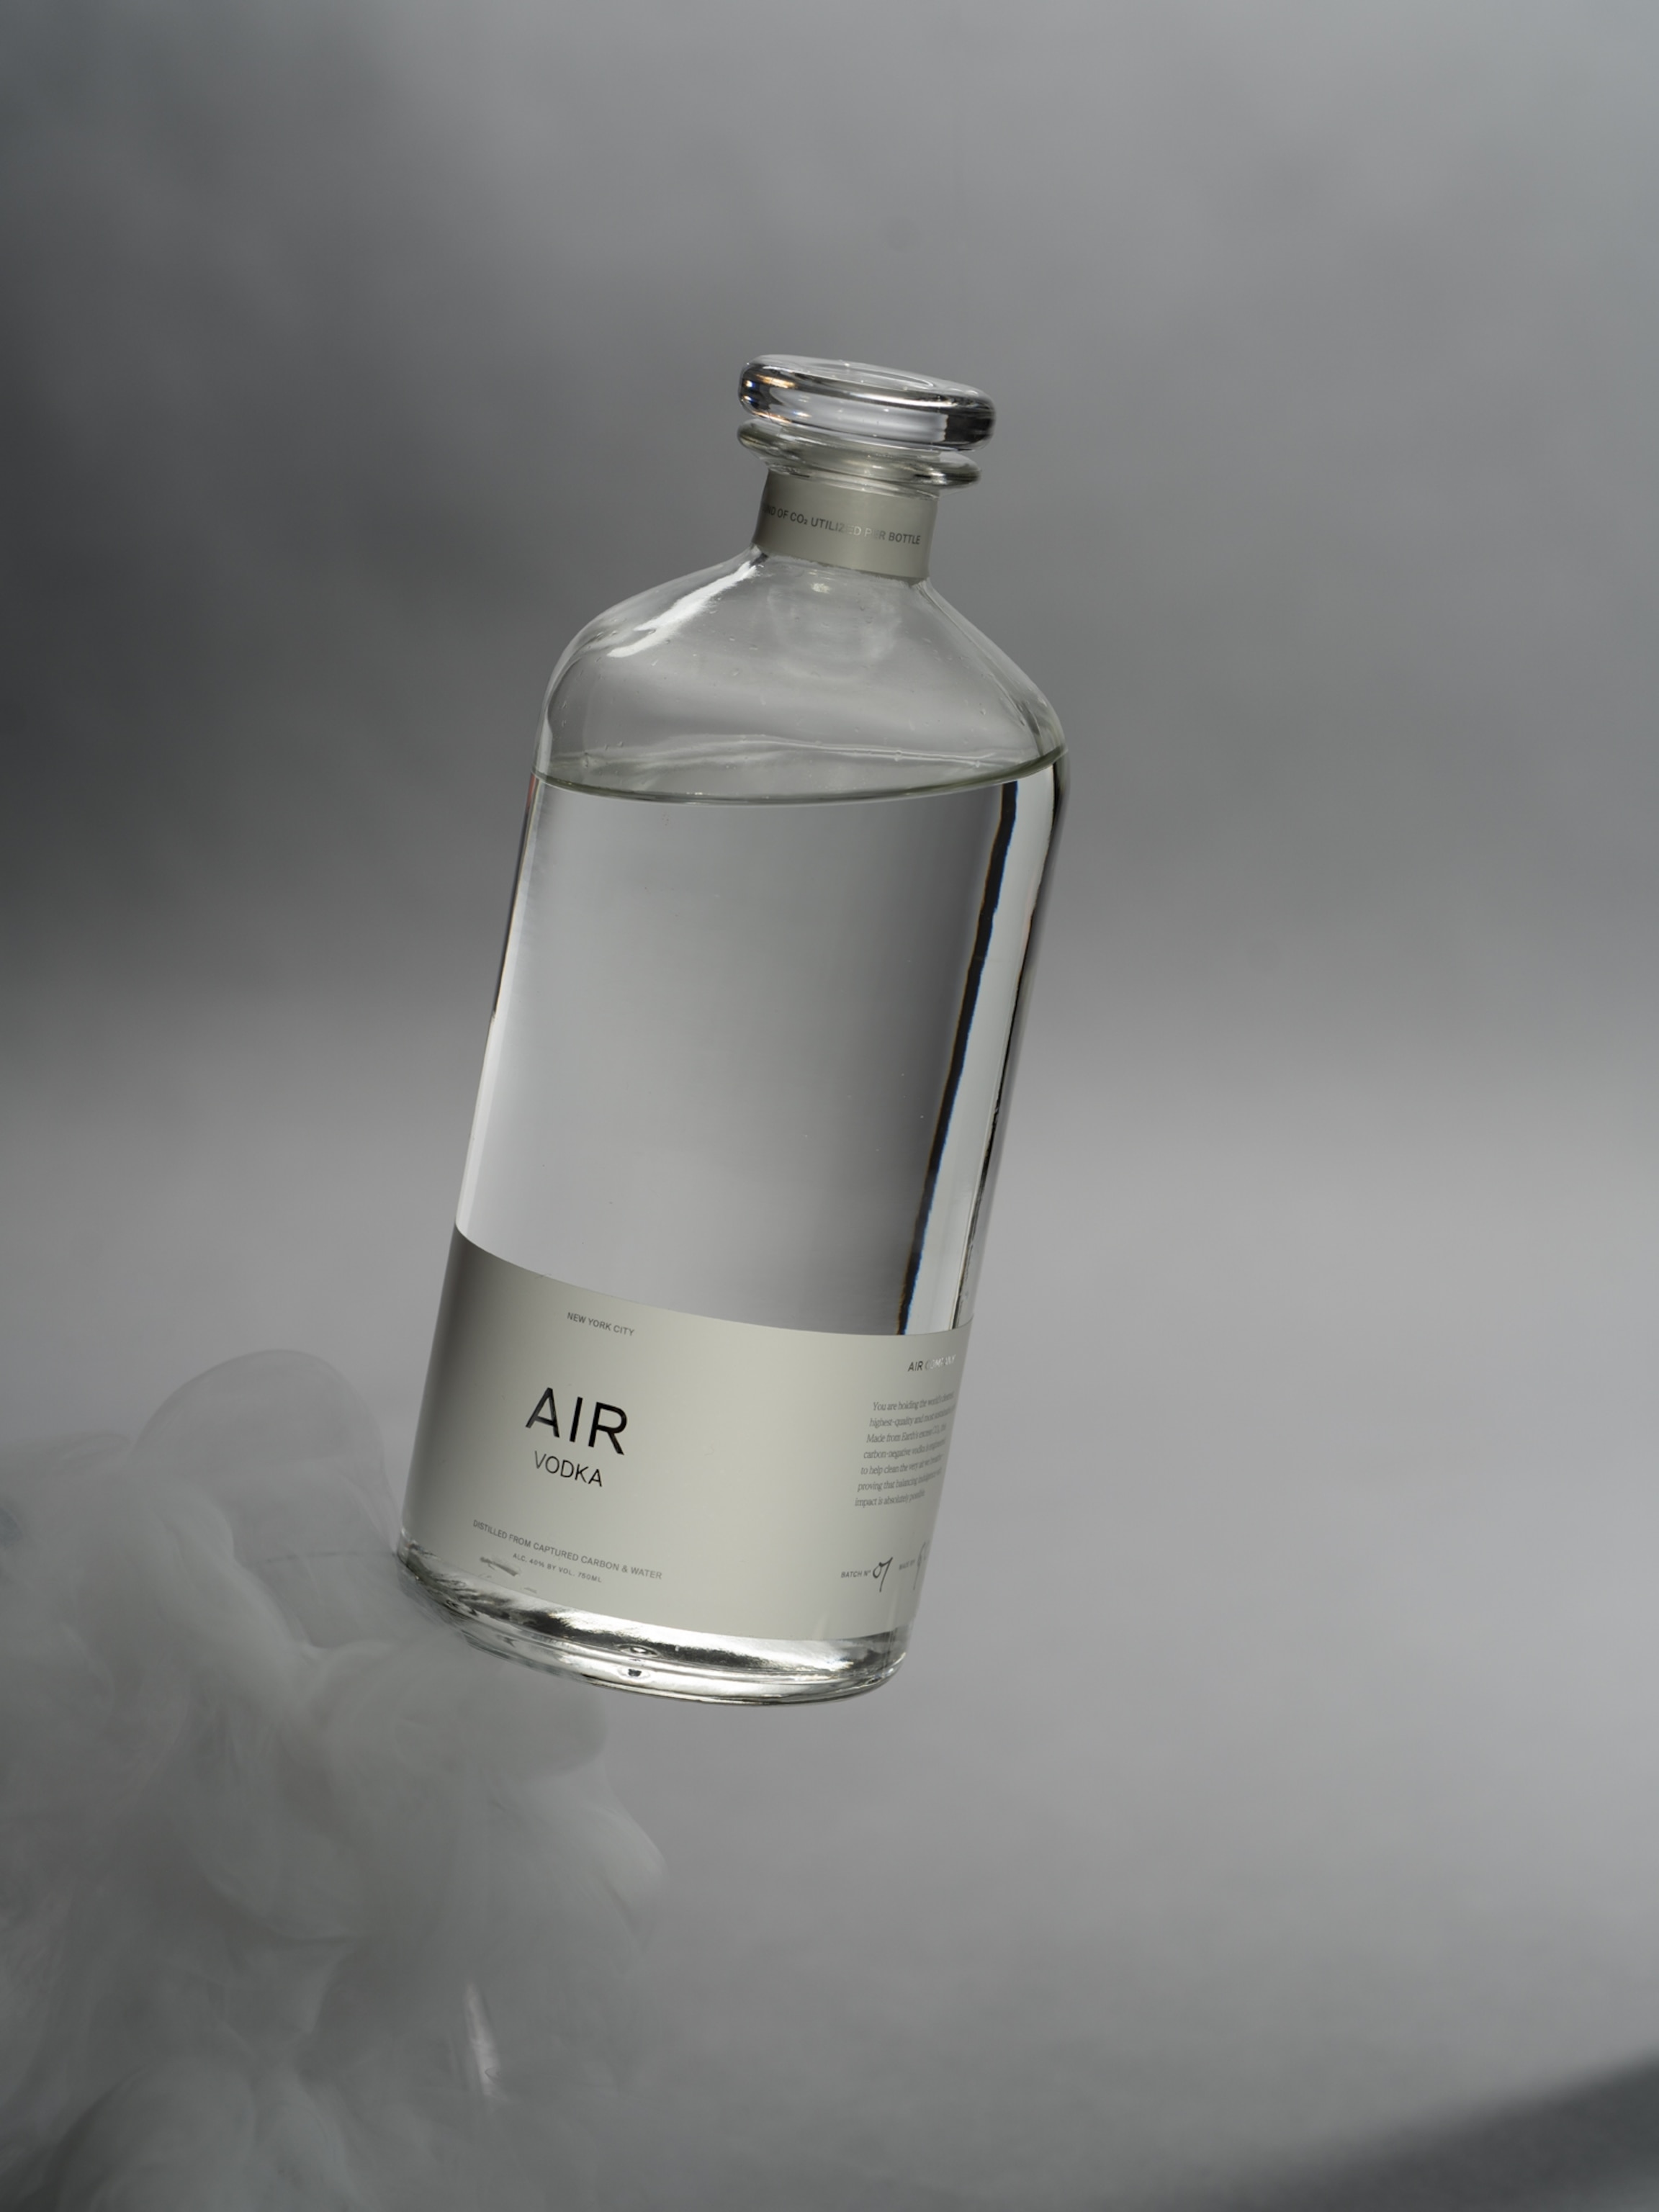 Clear glass bottle with Air vodka label.